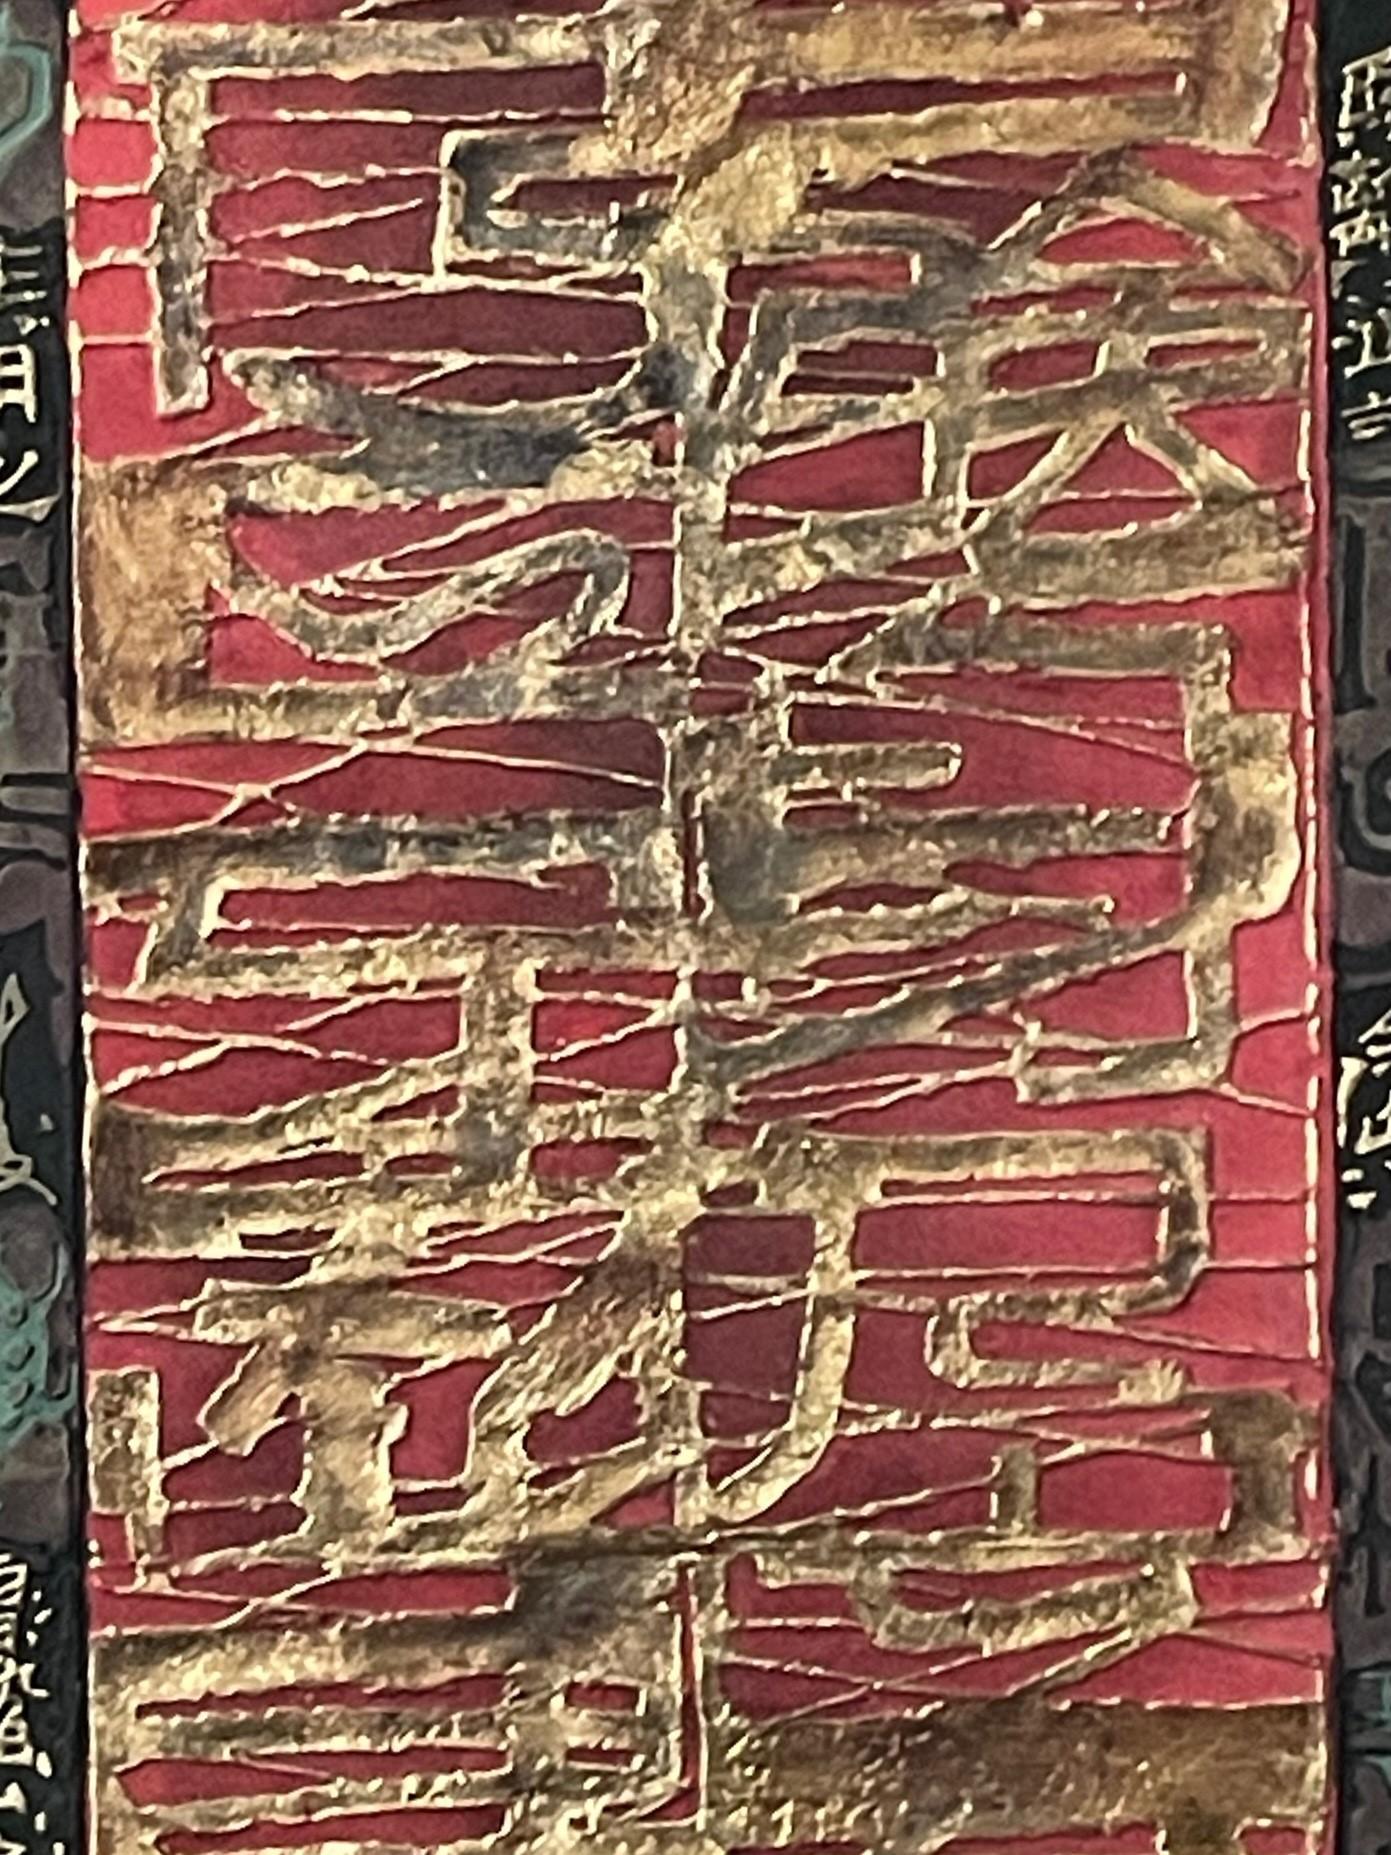 Modern 20th century Chinese Intaglio Calligraphy.

This image represents the meaning of “Self Renewal“ characterized by its unique style of calligraphy related elements, such as words, characters and symbols. This piece expresses a contemporary